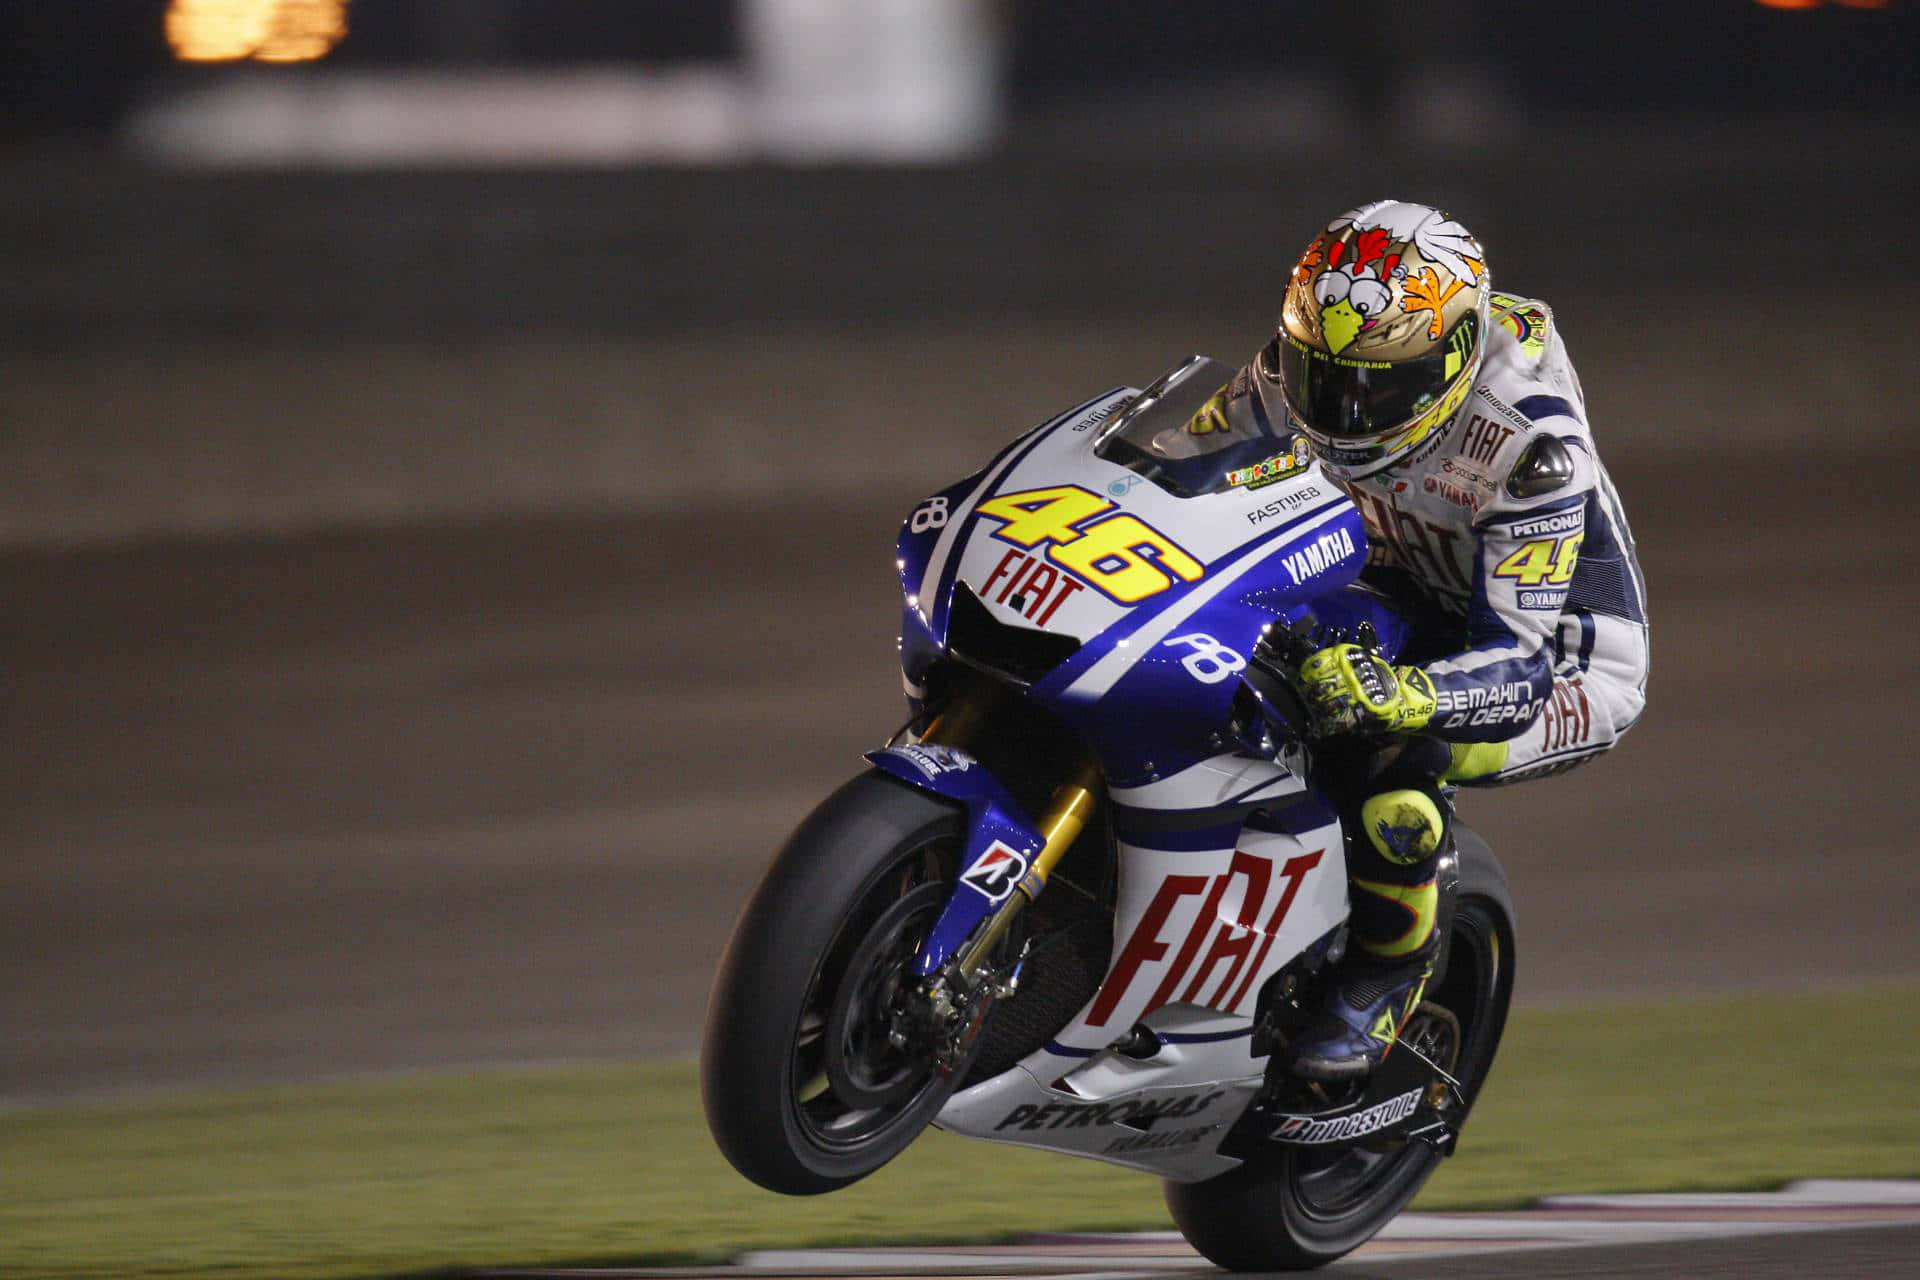 Vr46 Fiat Motorcycle